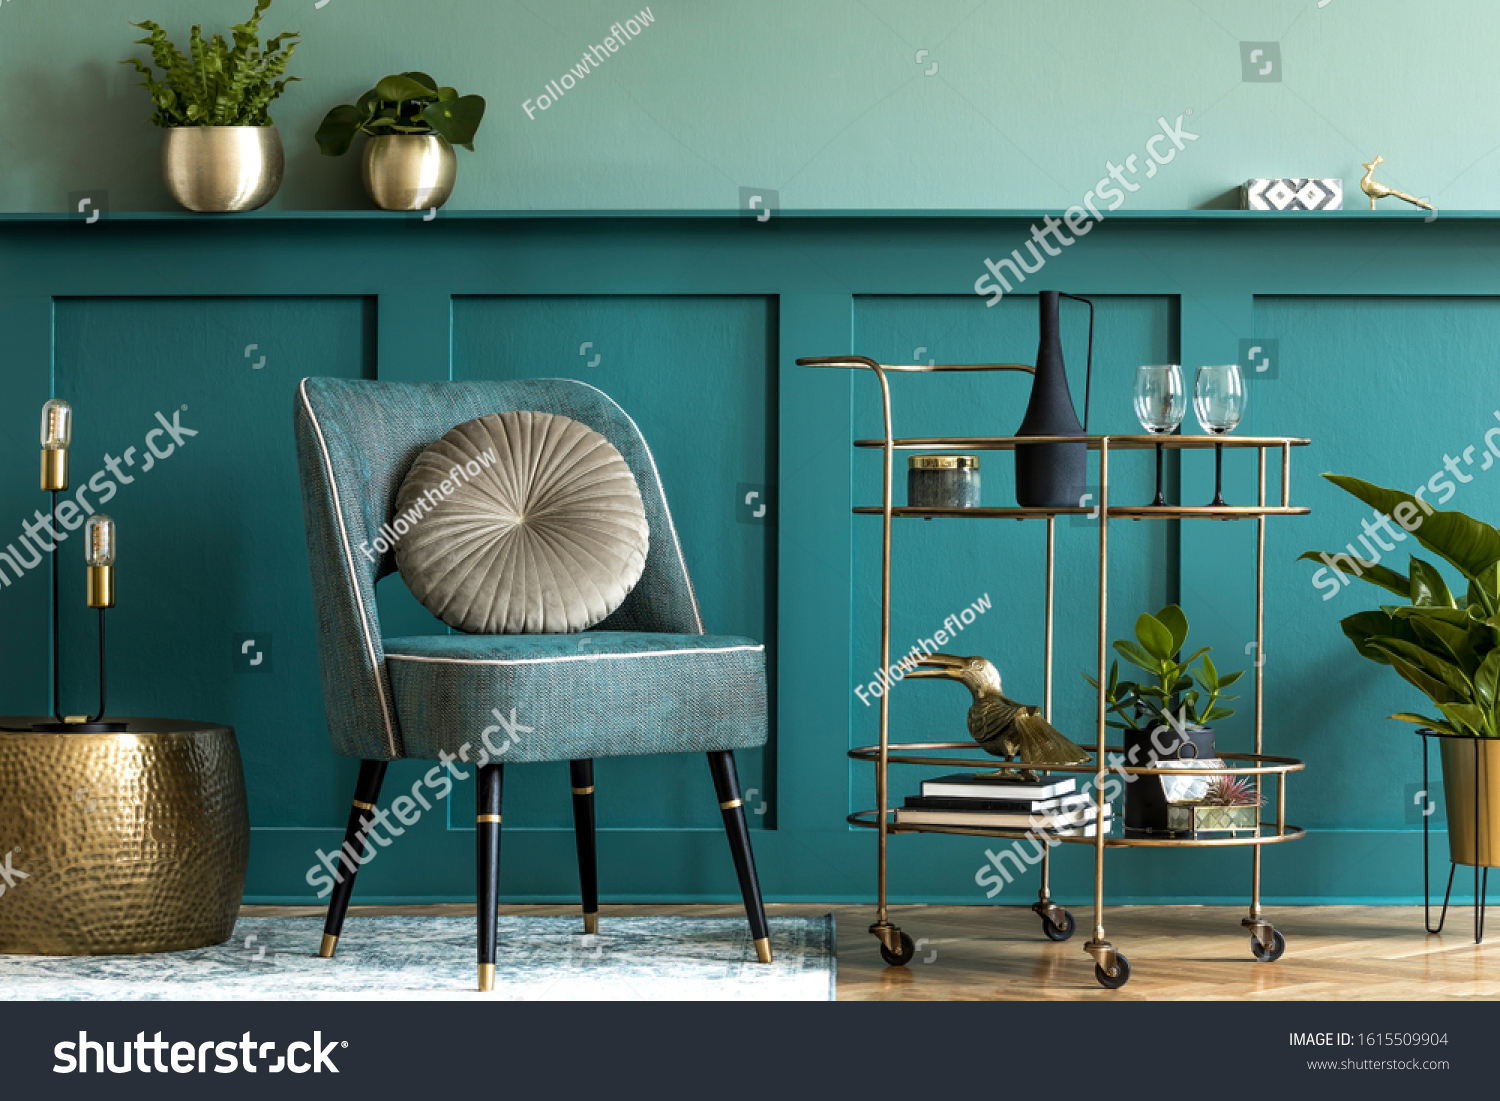 Interior design of luxury living room with stylish armchair, gold liquor cabinet, a lot of plants and elegant personal accessories. Green wall panelling with shelf. Modern home decor. Template.  #1615509904